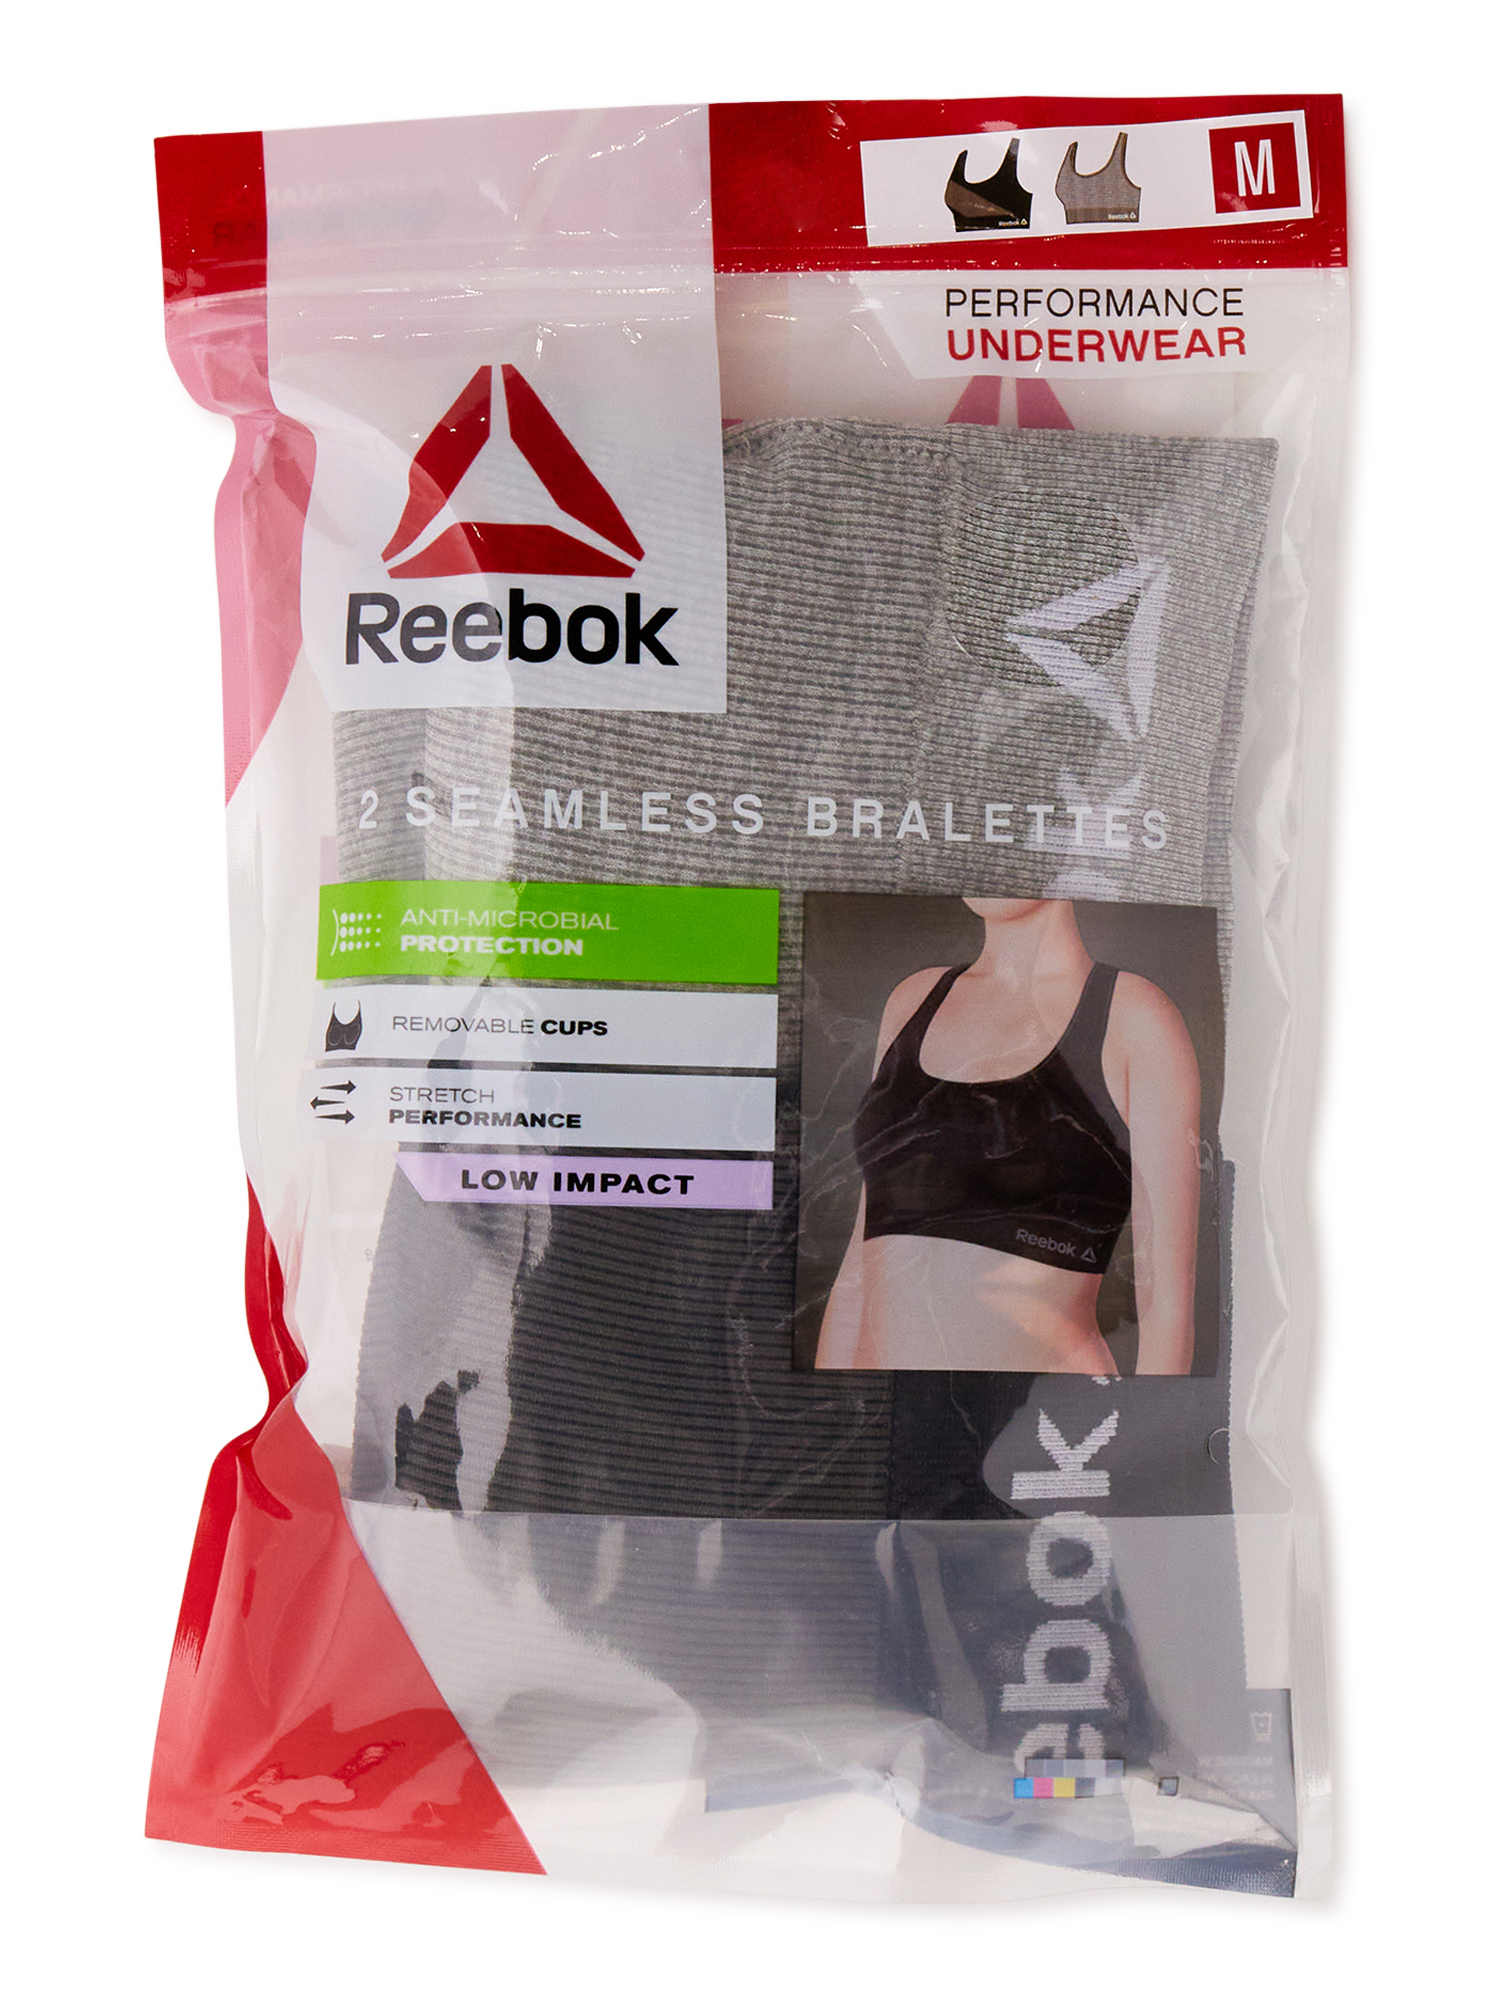 Reebok Women's Stay-Put Bonded Stretch Bralette, 2 Pack - image 4 of 7